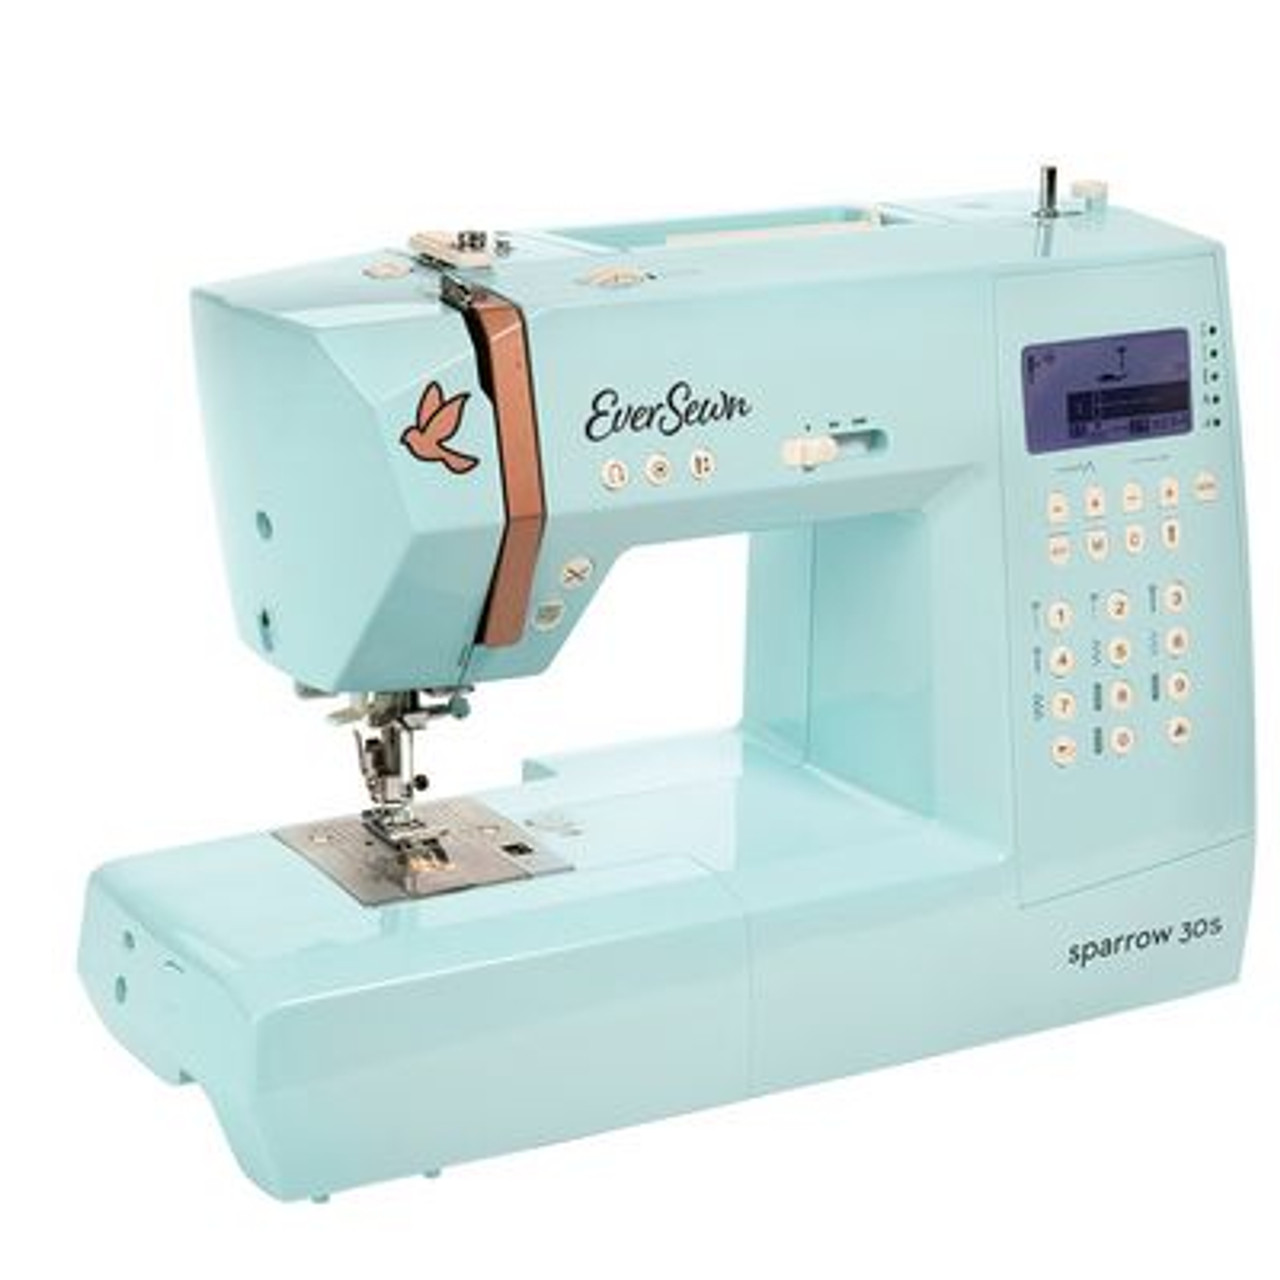 EVERSEWN Sparrow 30 - 310 stitch computerized sewing machine. This machine offers everything a creative sewer could need, at a very attractive price / performance ratio. Features include: 310 stitch patterns in total, including 32 utility, 84 decorative, and 2 full alphabets. Decorative stitches can be set up to a width of 7 mm, as desired. The memory function allows individual stitch combinations to be saved. With the push of a button, the Sparrow 30 cuts your thread automatically. In addition to features such as adjustable presser foot pressure, sewing speed control, start/stop function and needle stop up/down, the EverSewn Sparrow 30 also includes 9 presser feet, including the ¼" and walking foot, plus an extension table!